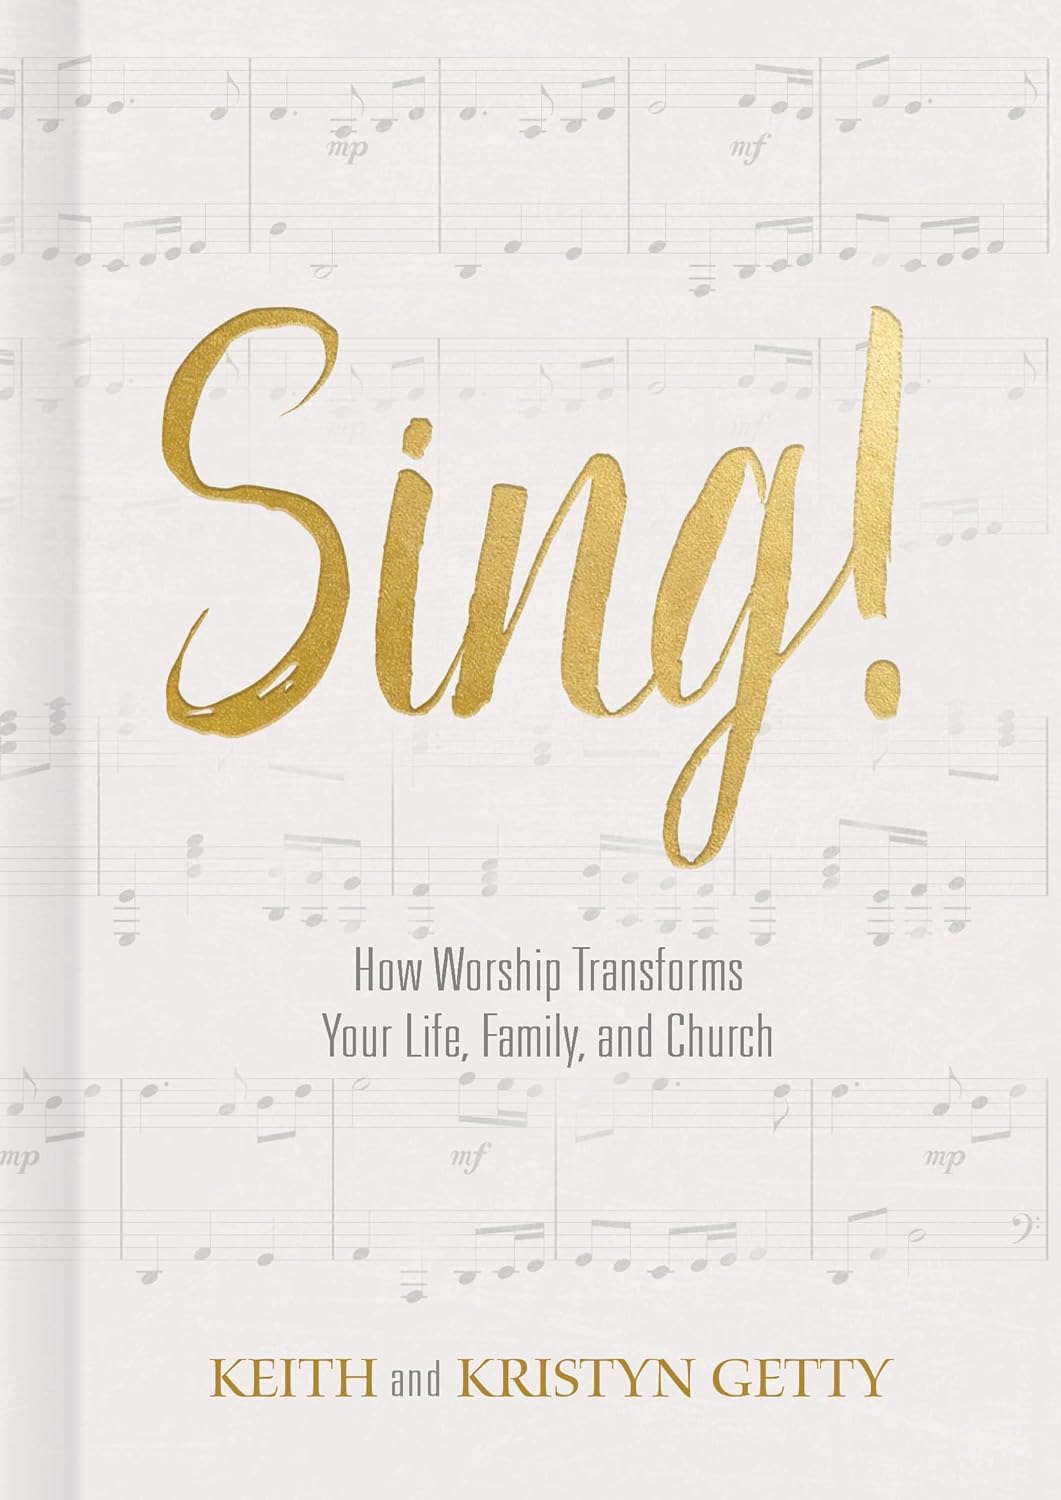 Image of a book cover from Sing! By Keith and Kristyn Getty.